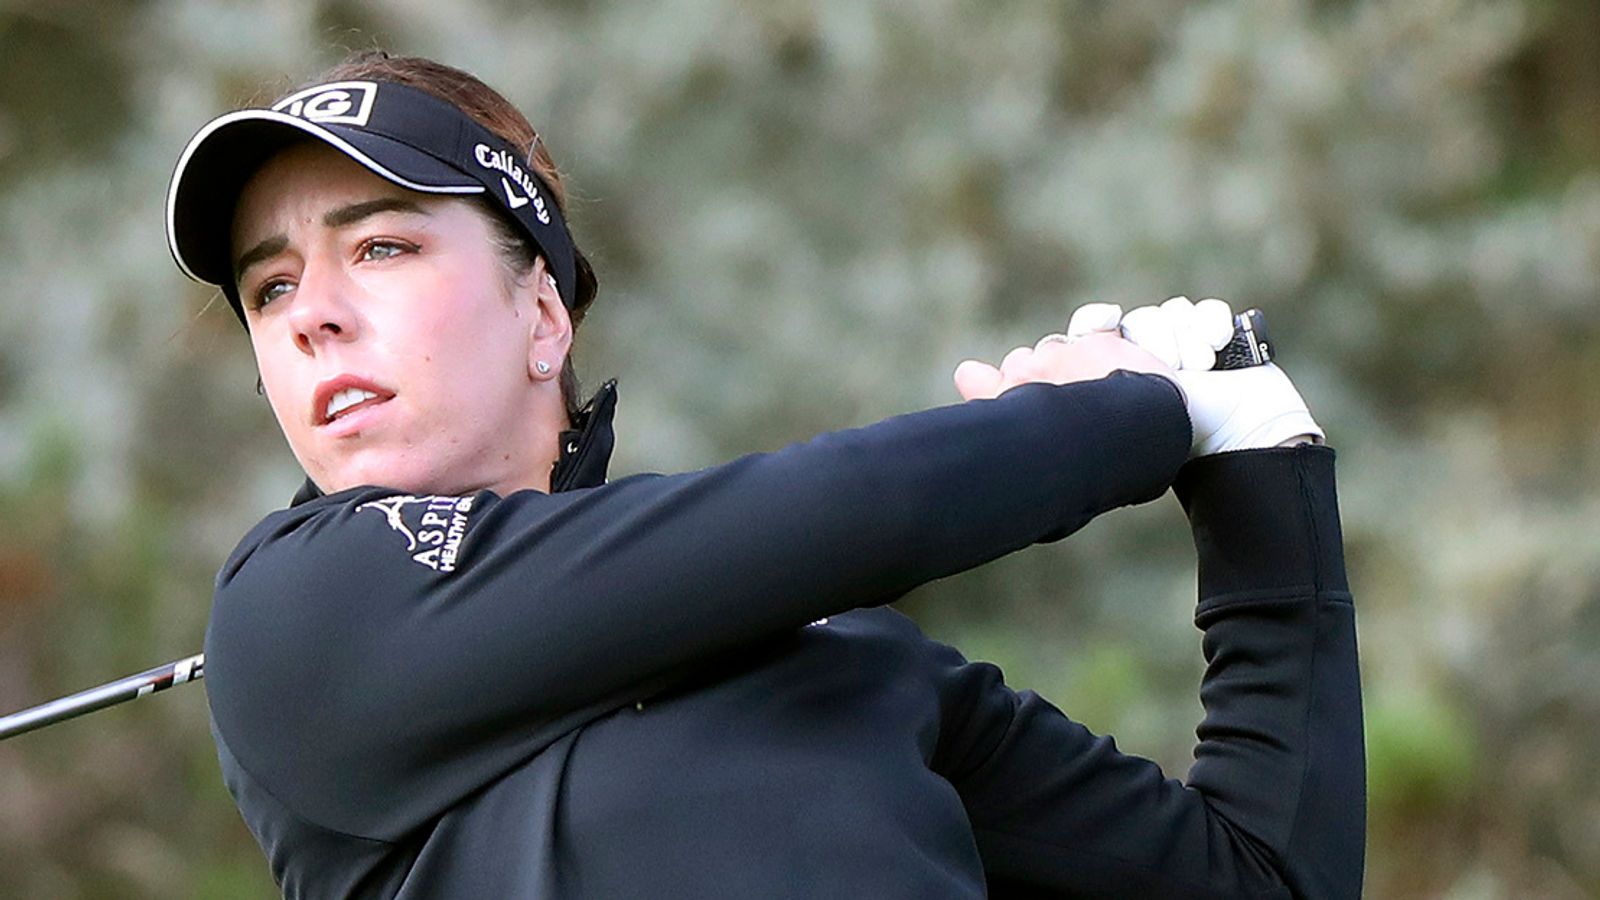 LPGA Tour: Free live YouTube stream from every round of Mediheal Championship in California